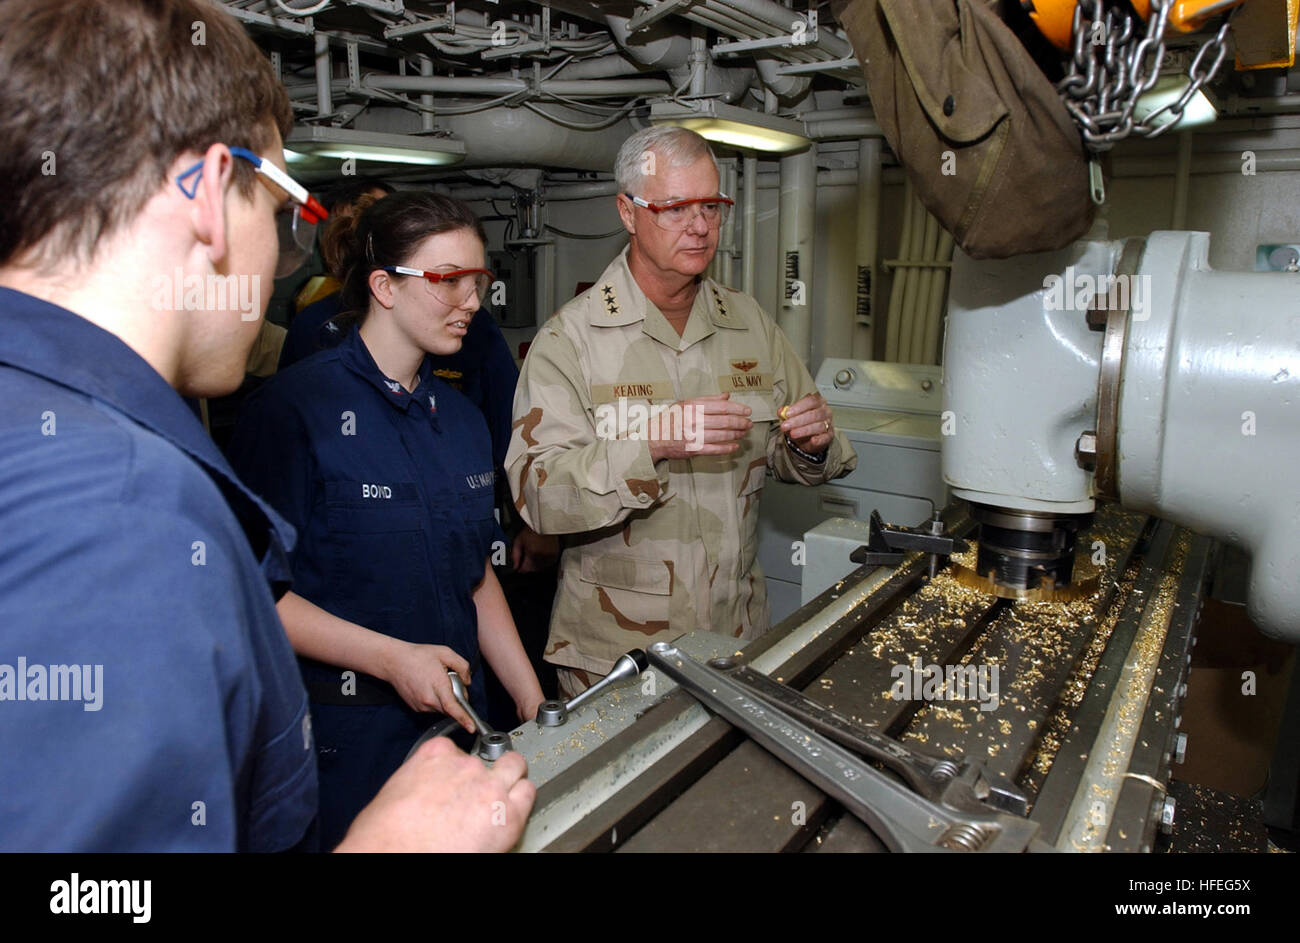 030301-N-0120R-012 Arabian Gulf (Mar. 1, 2003) -- Vice Adm. Timothy Keating, Commander, U.S. Naval Force Central Command, tours a machine shop space aboard the aircraft carrier USS Kitty Hawk (CV 63), during a visit with Sailors in the region. Kitty Hawk and Carrier Air Wing Five (CVW-5) are operating with coalition forces in the Arabian Gulf and is the worldÕs only permanently forward-deployed aircraft carrier operating out of Yokosuka, Japan.  U.S. Navy photo by PhotographerÕs Mate 3rd Class William H. Ramsey.  (RELEASED) US Navy 030301-N-0120R-012 Vadm. Keating visits USS Kitty Hawk Stock Photo